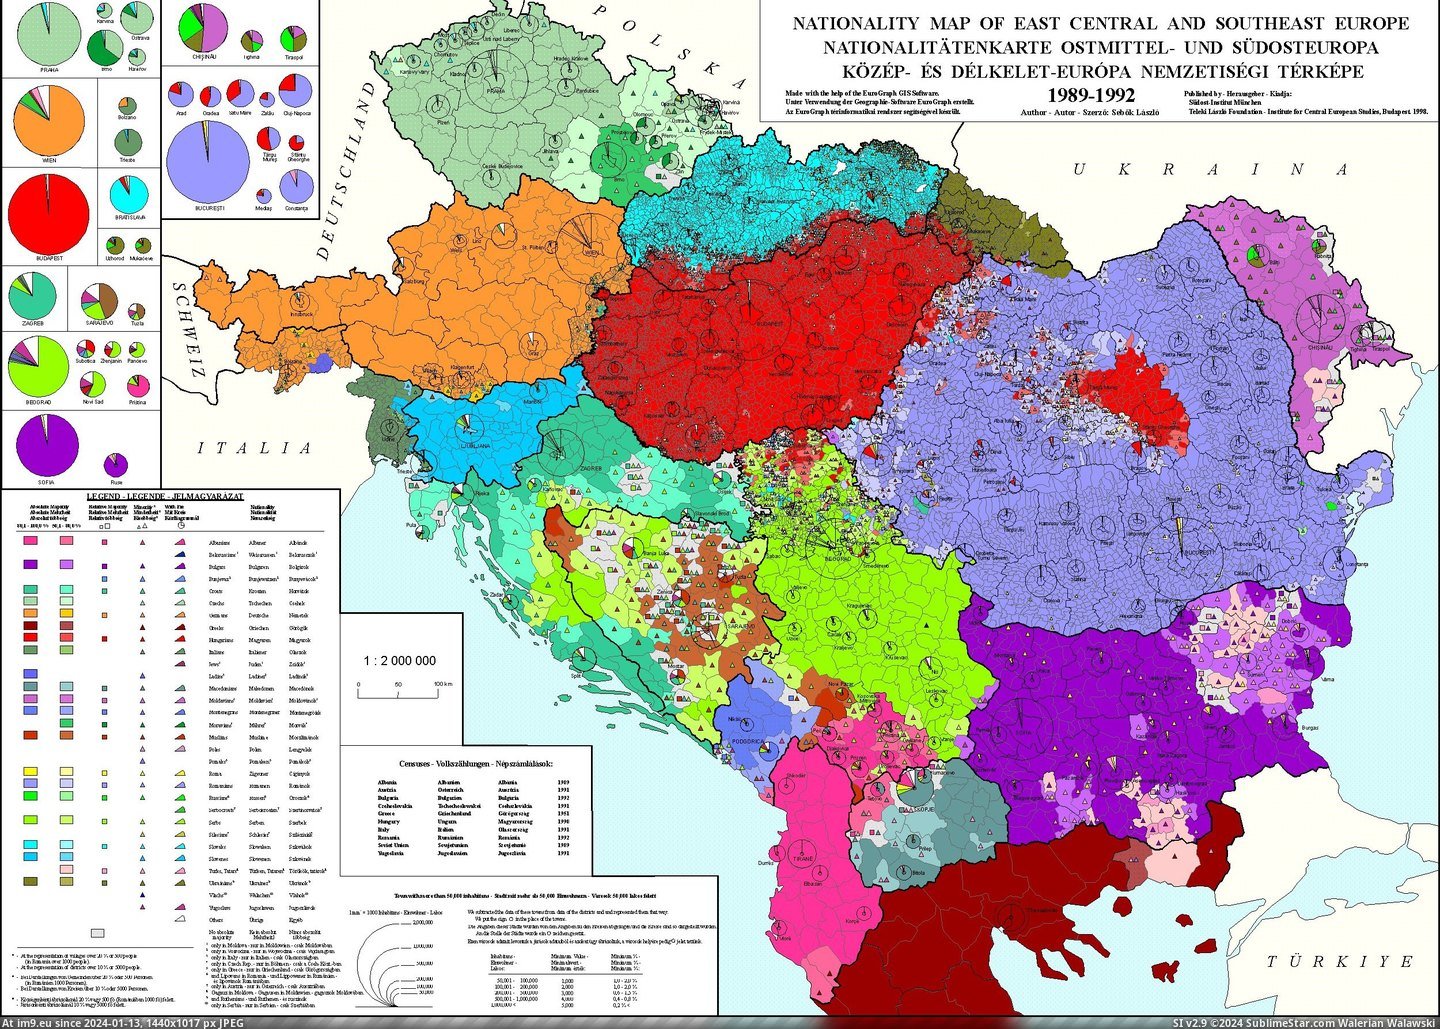 #Map #Europe #Nationality #Balkans #Southern #Central [Mapporn] Nationality Map of the Balkans and southern Central Europe [2500x1778] Pic. (Image of album My r/MAPS favs))